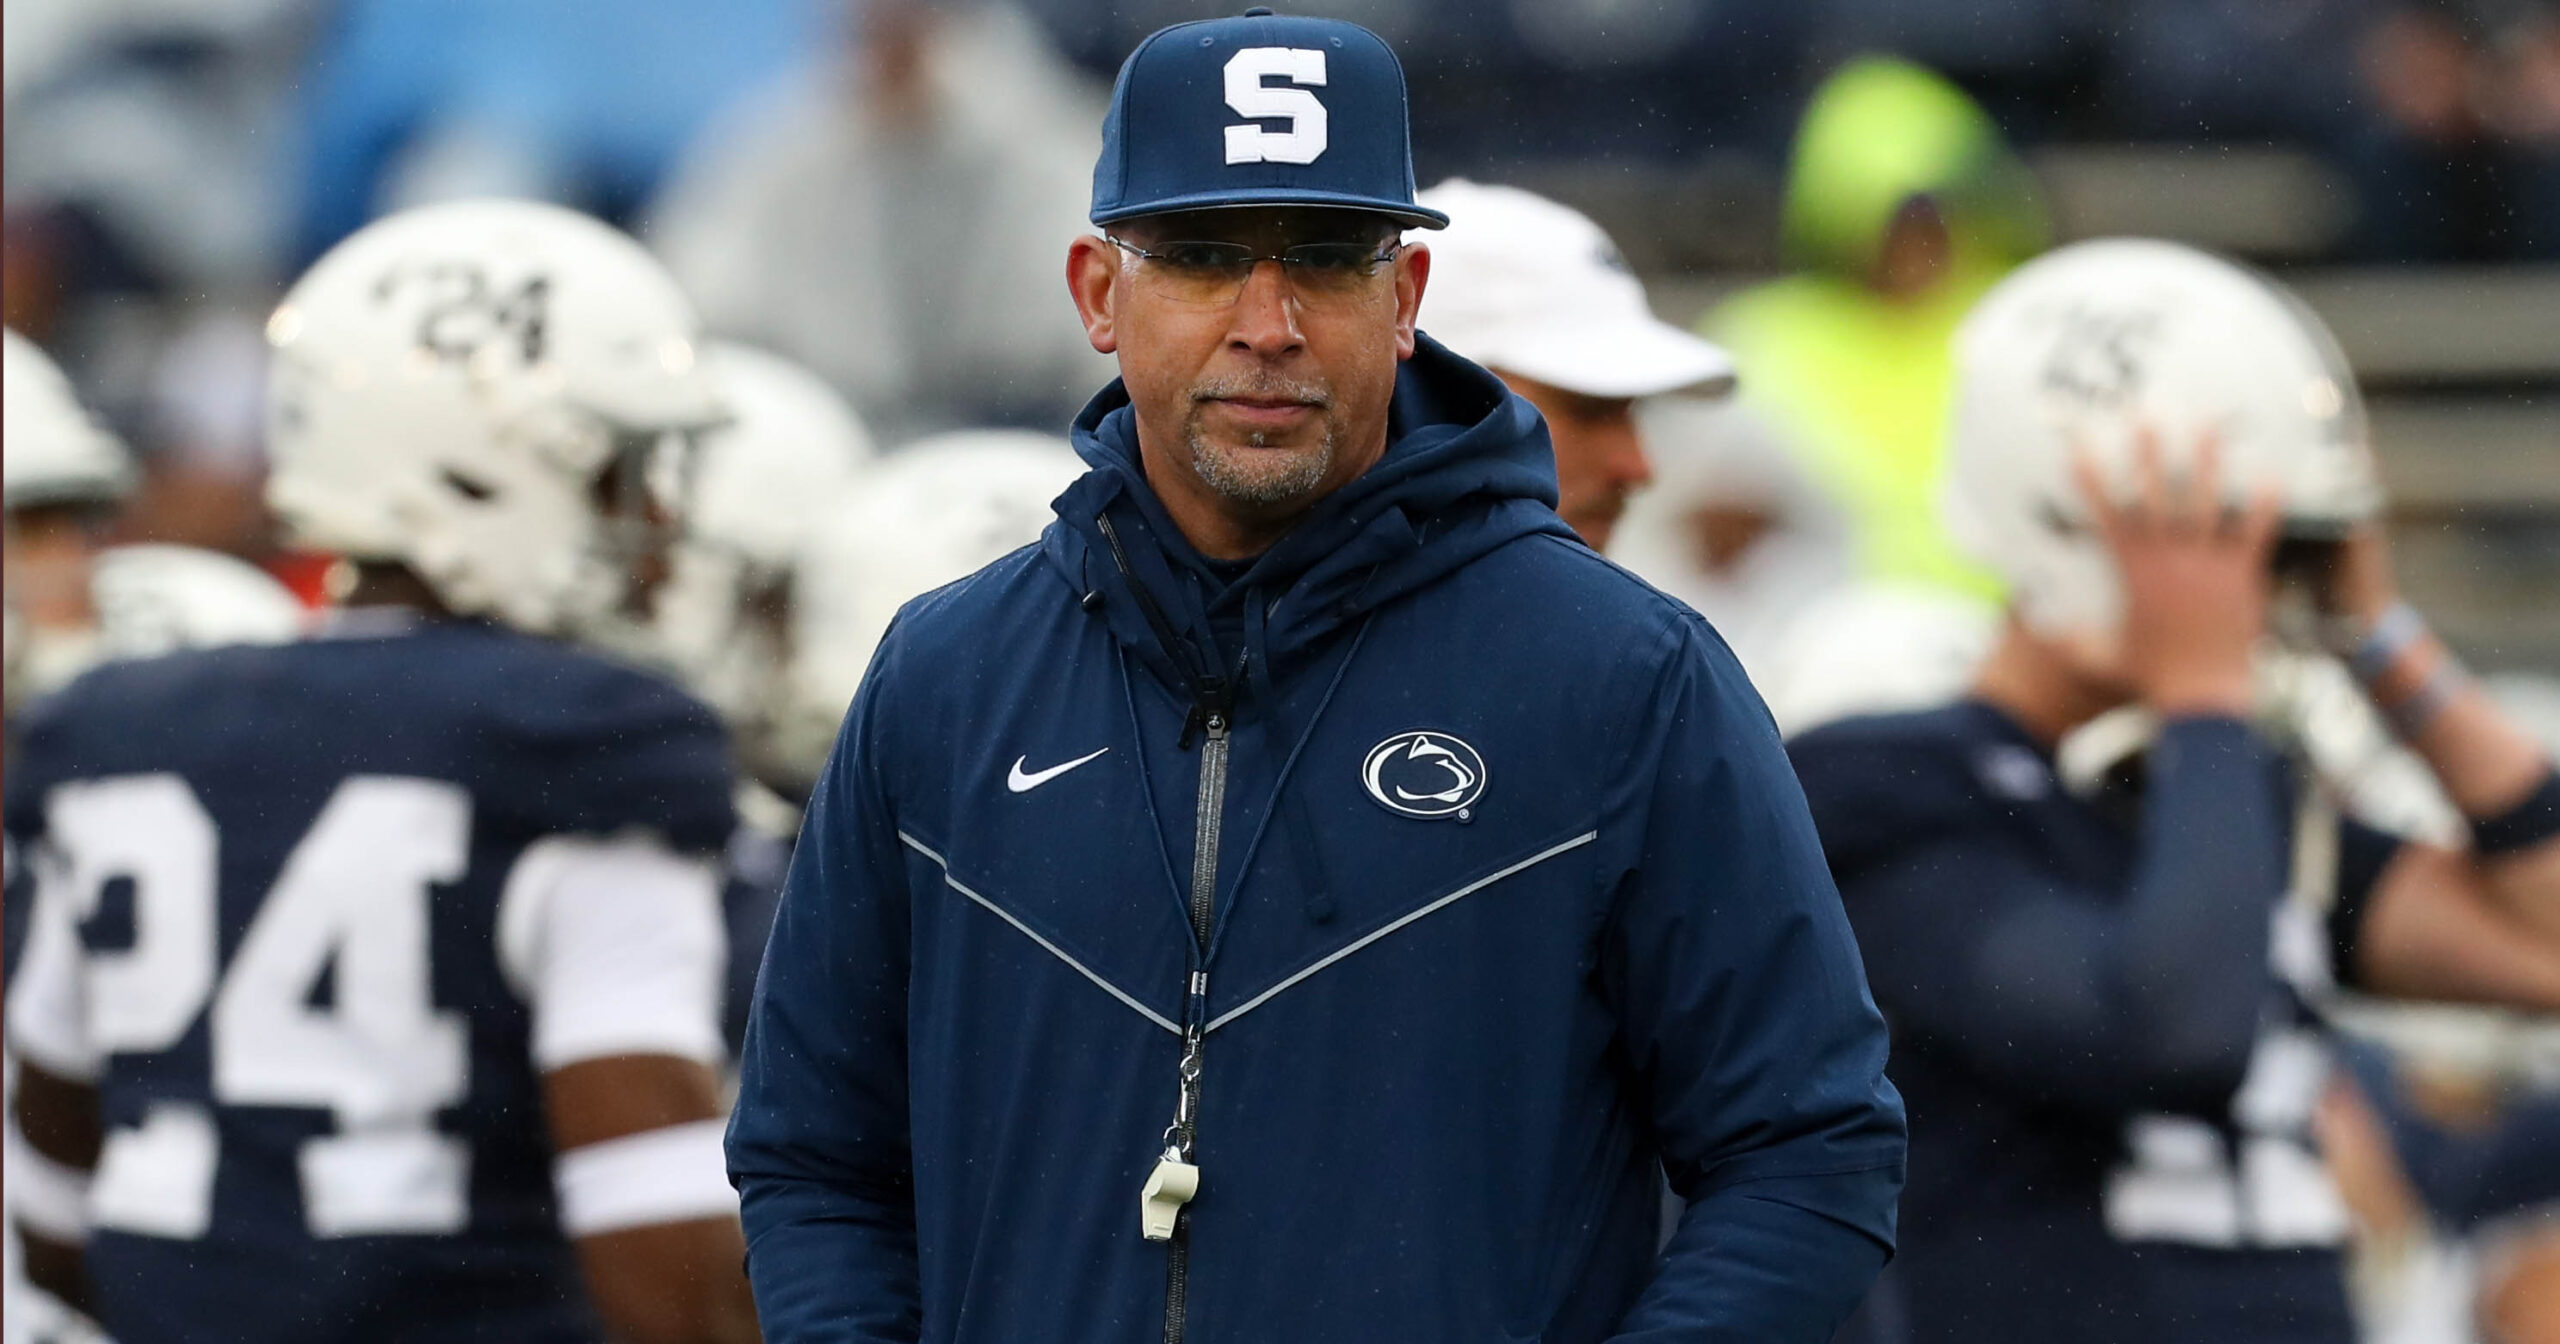 Read everything Penn State head coach James Franklin said following win ...